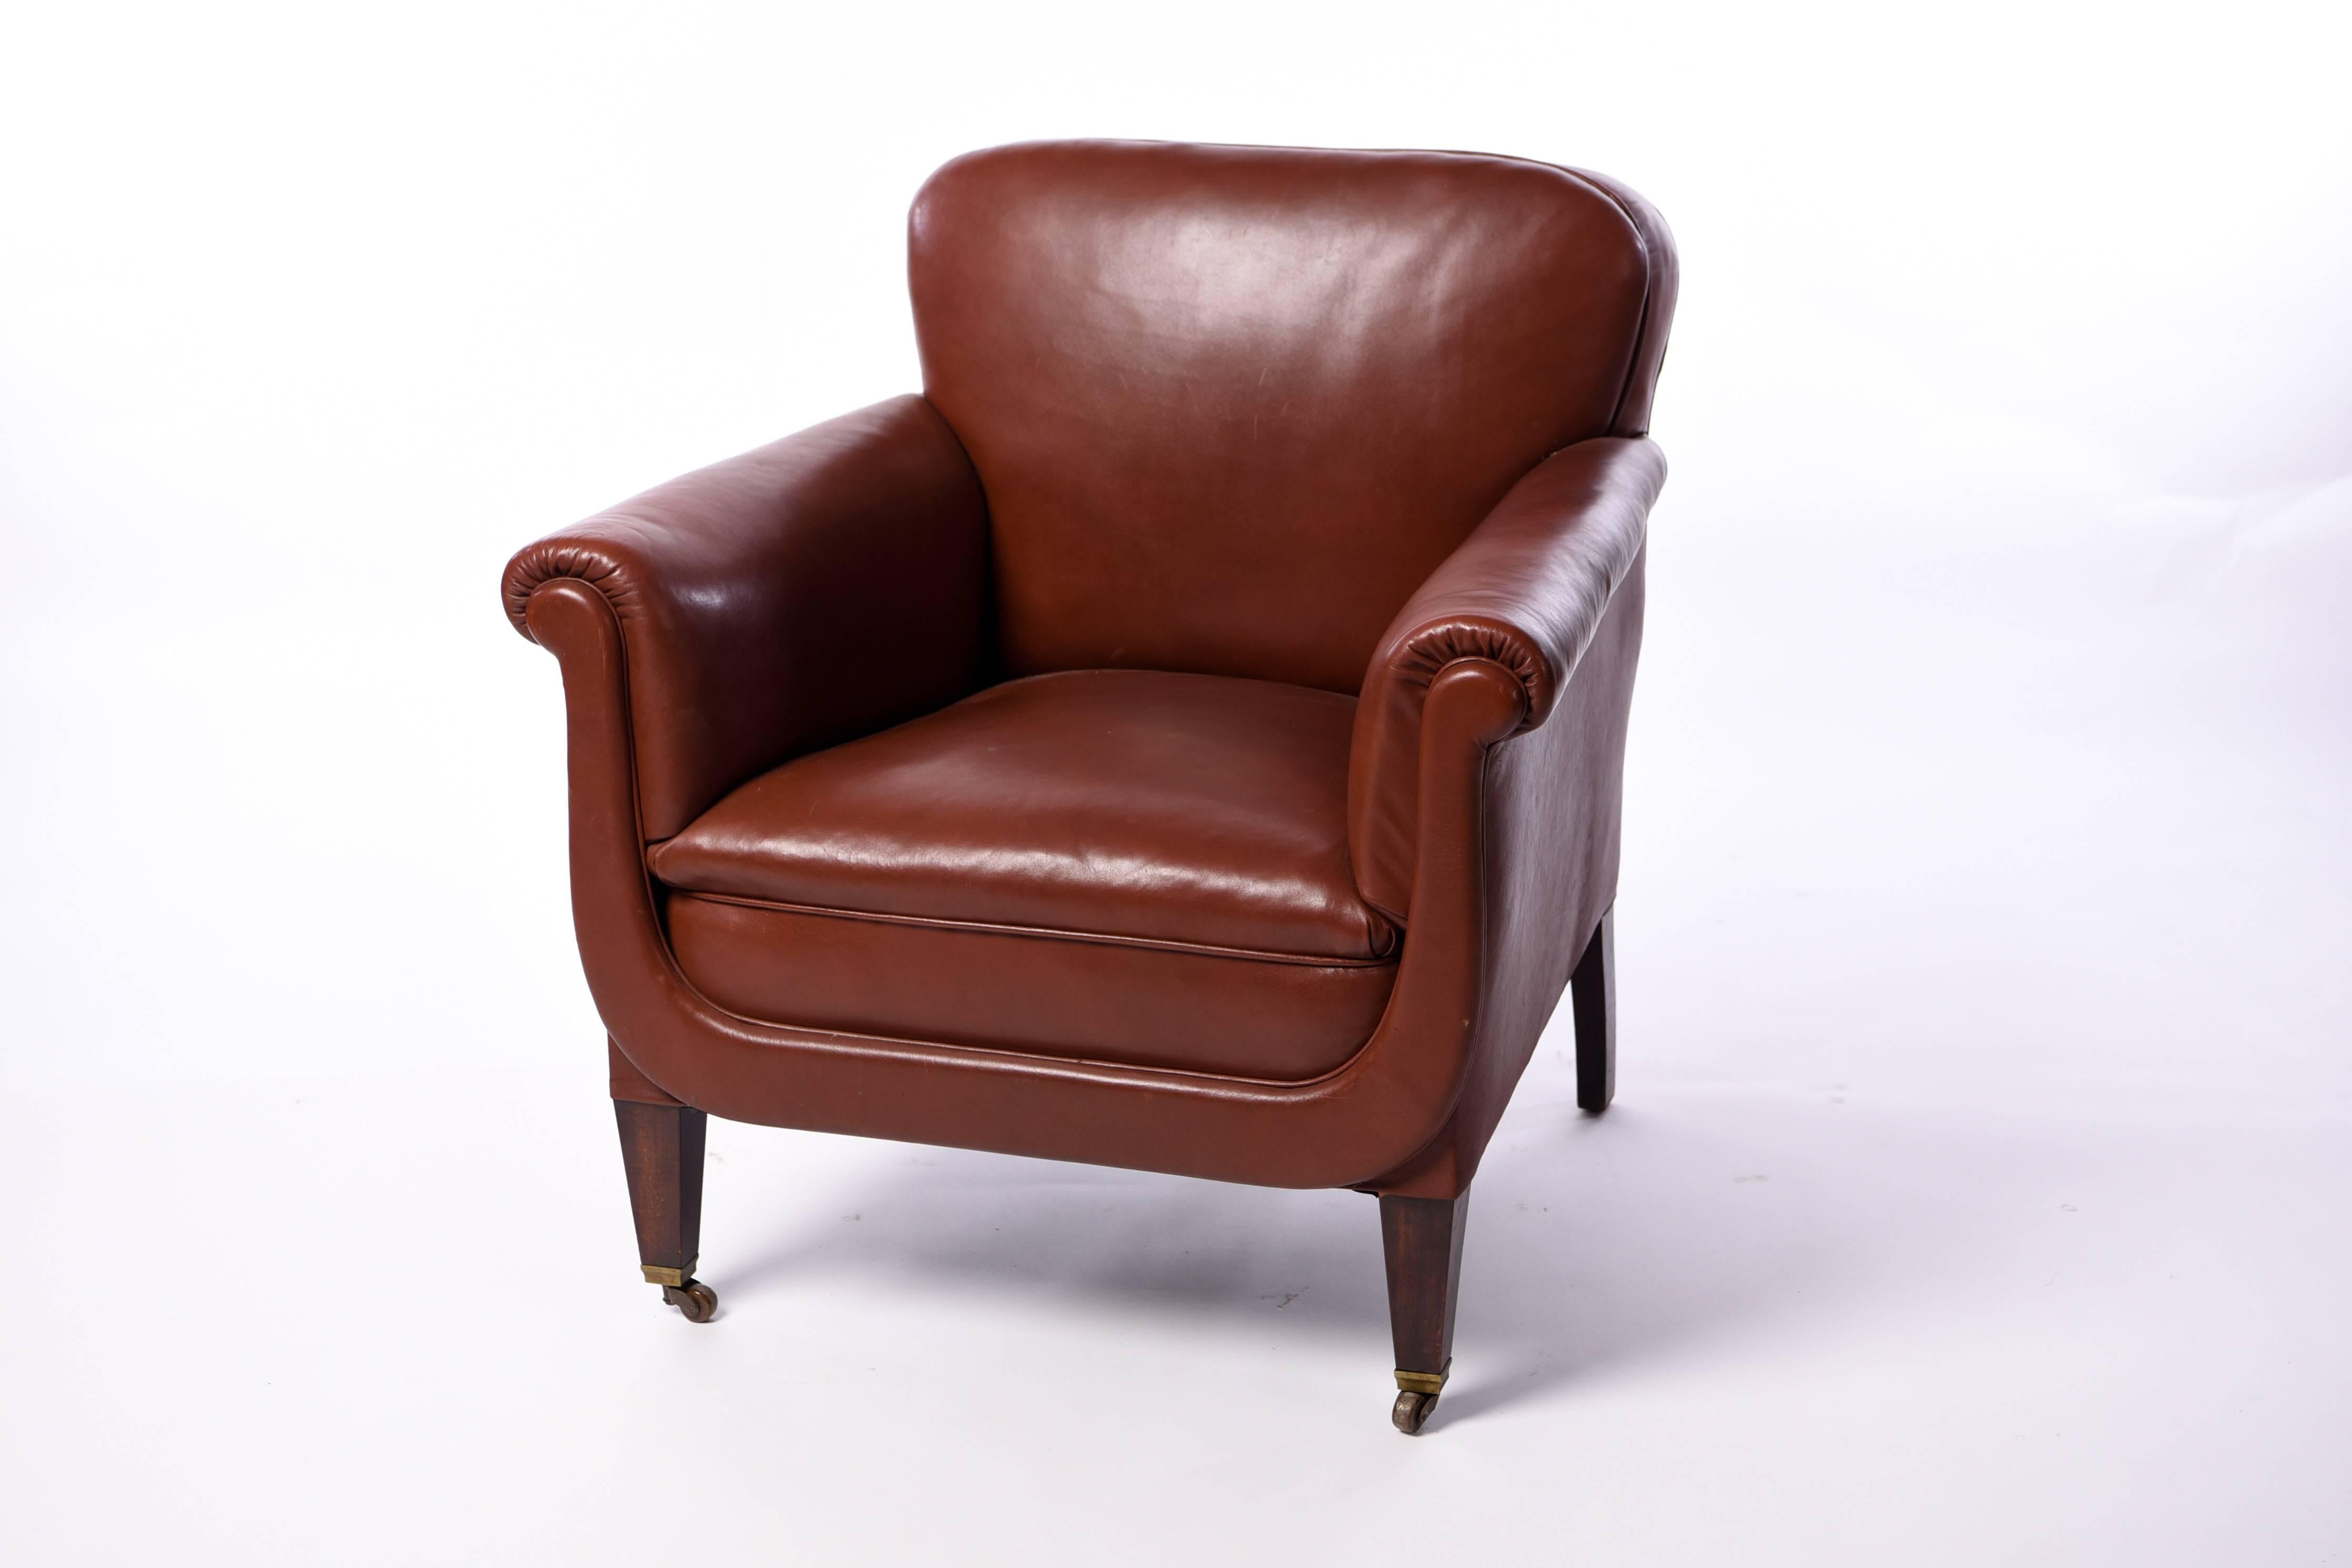 This club chair is upholstered in an earthy red leather and sits on casters which make for convenient mobility.